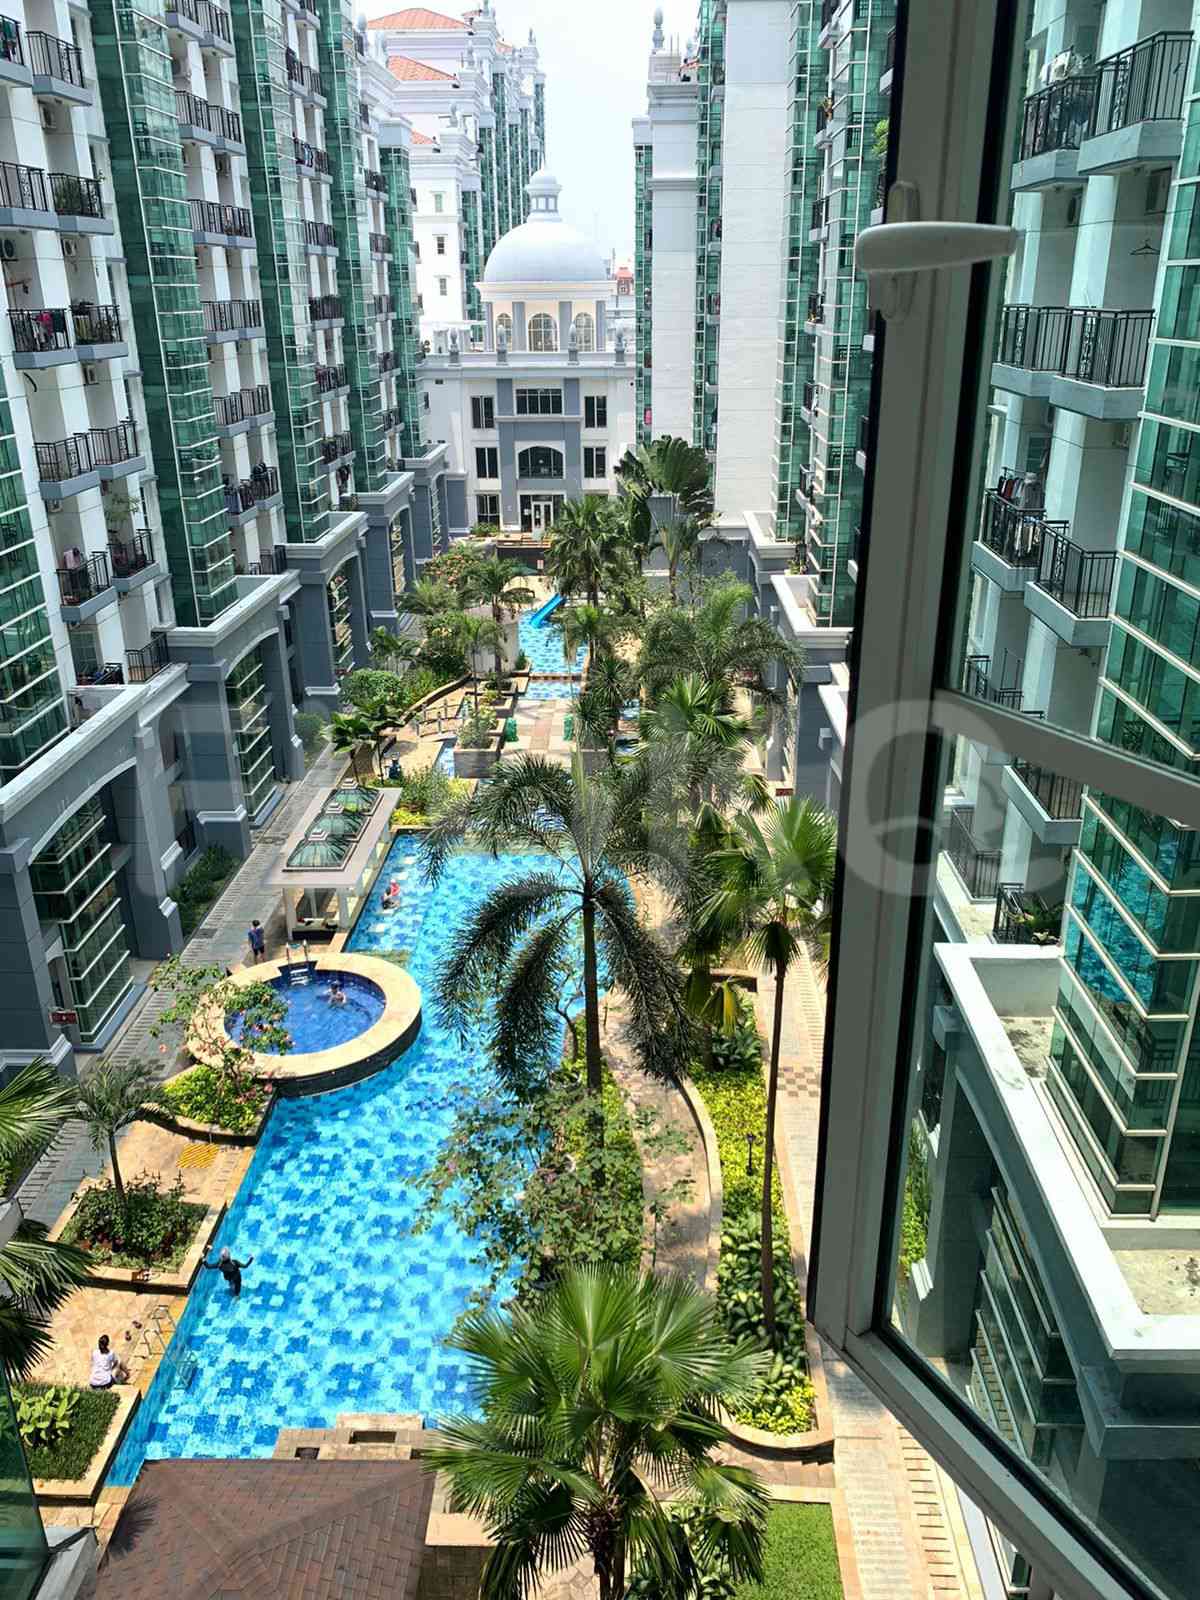 3 Bedroom on 6th Floor for Rent in Gading Resort Residence - fkeb22 11